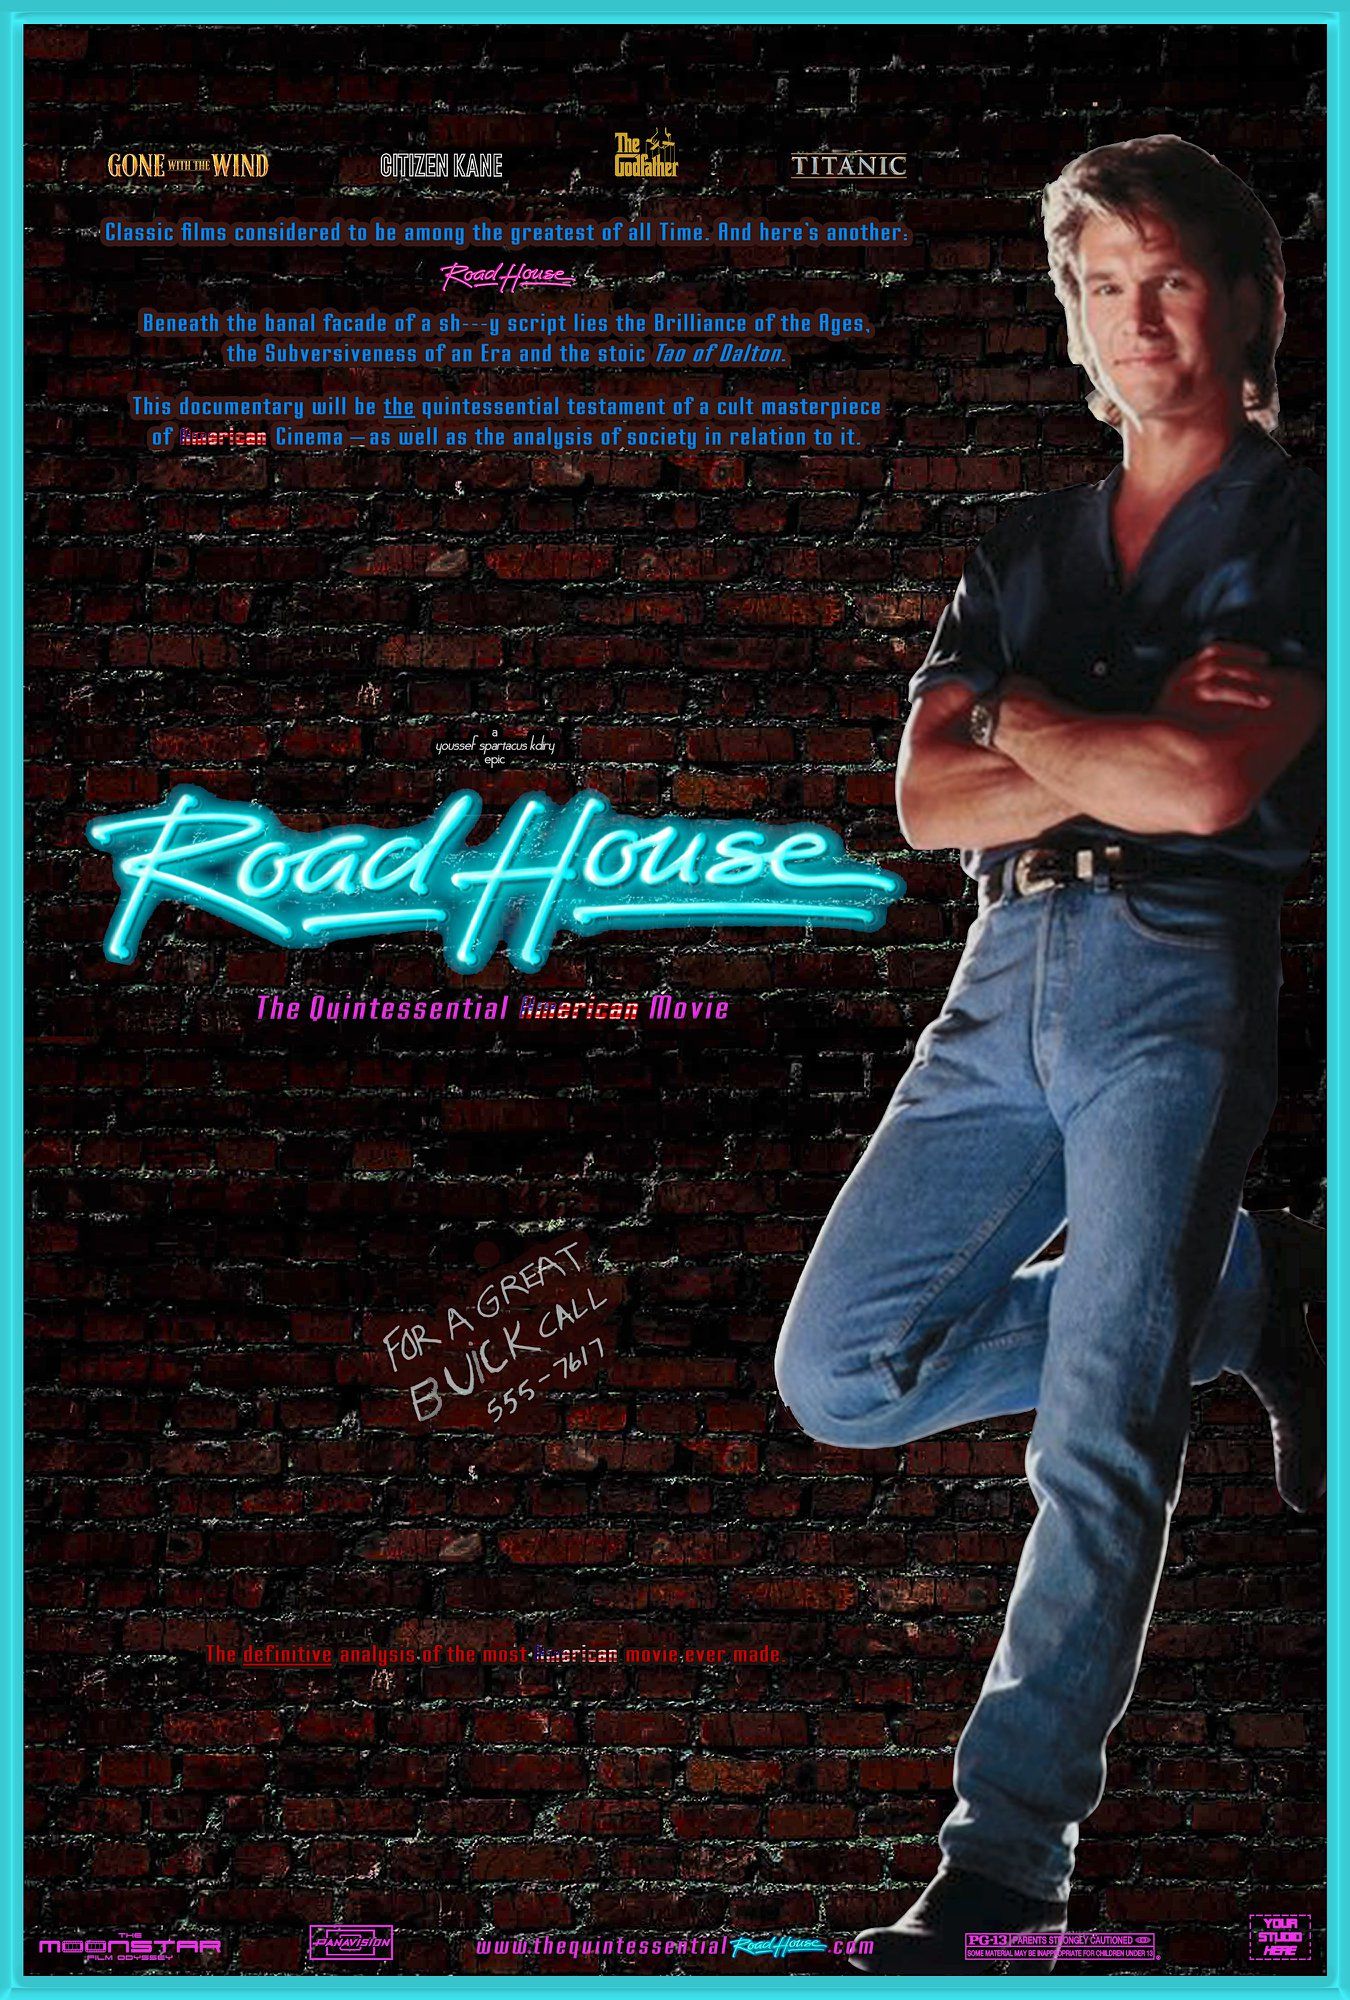 ROAD HOUSE: THE QUINTESSENTIAL AMERICAN MOVIE